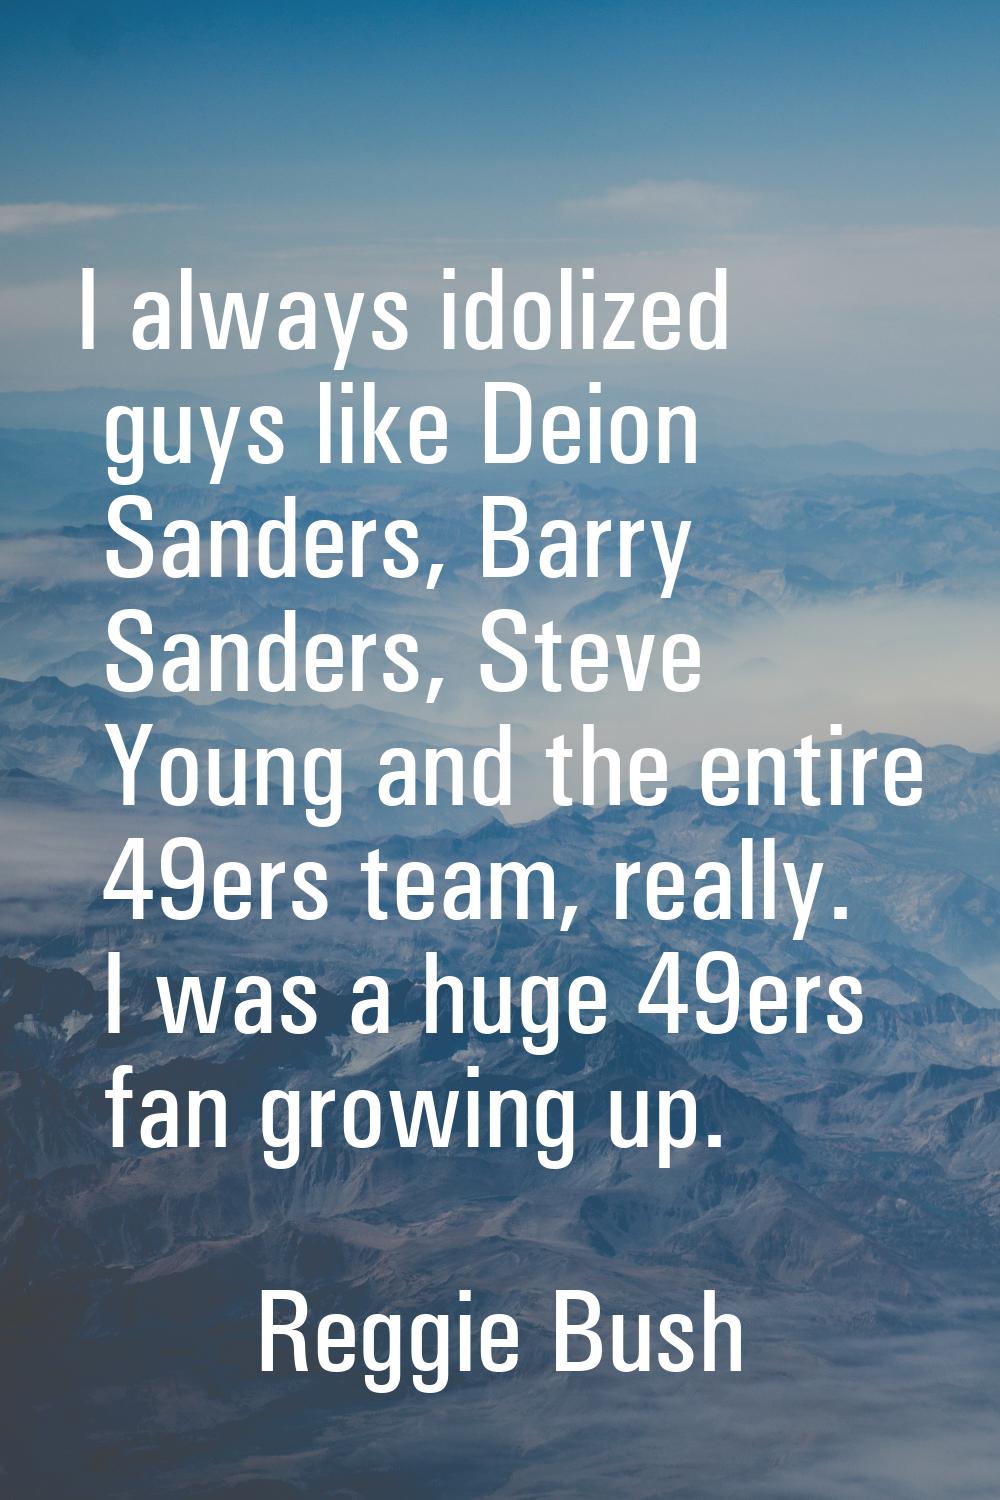 I always idolized guys like Deion Sanders, Barry Sanders, Steve Young and the entire 49ers team, re